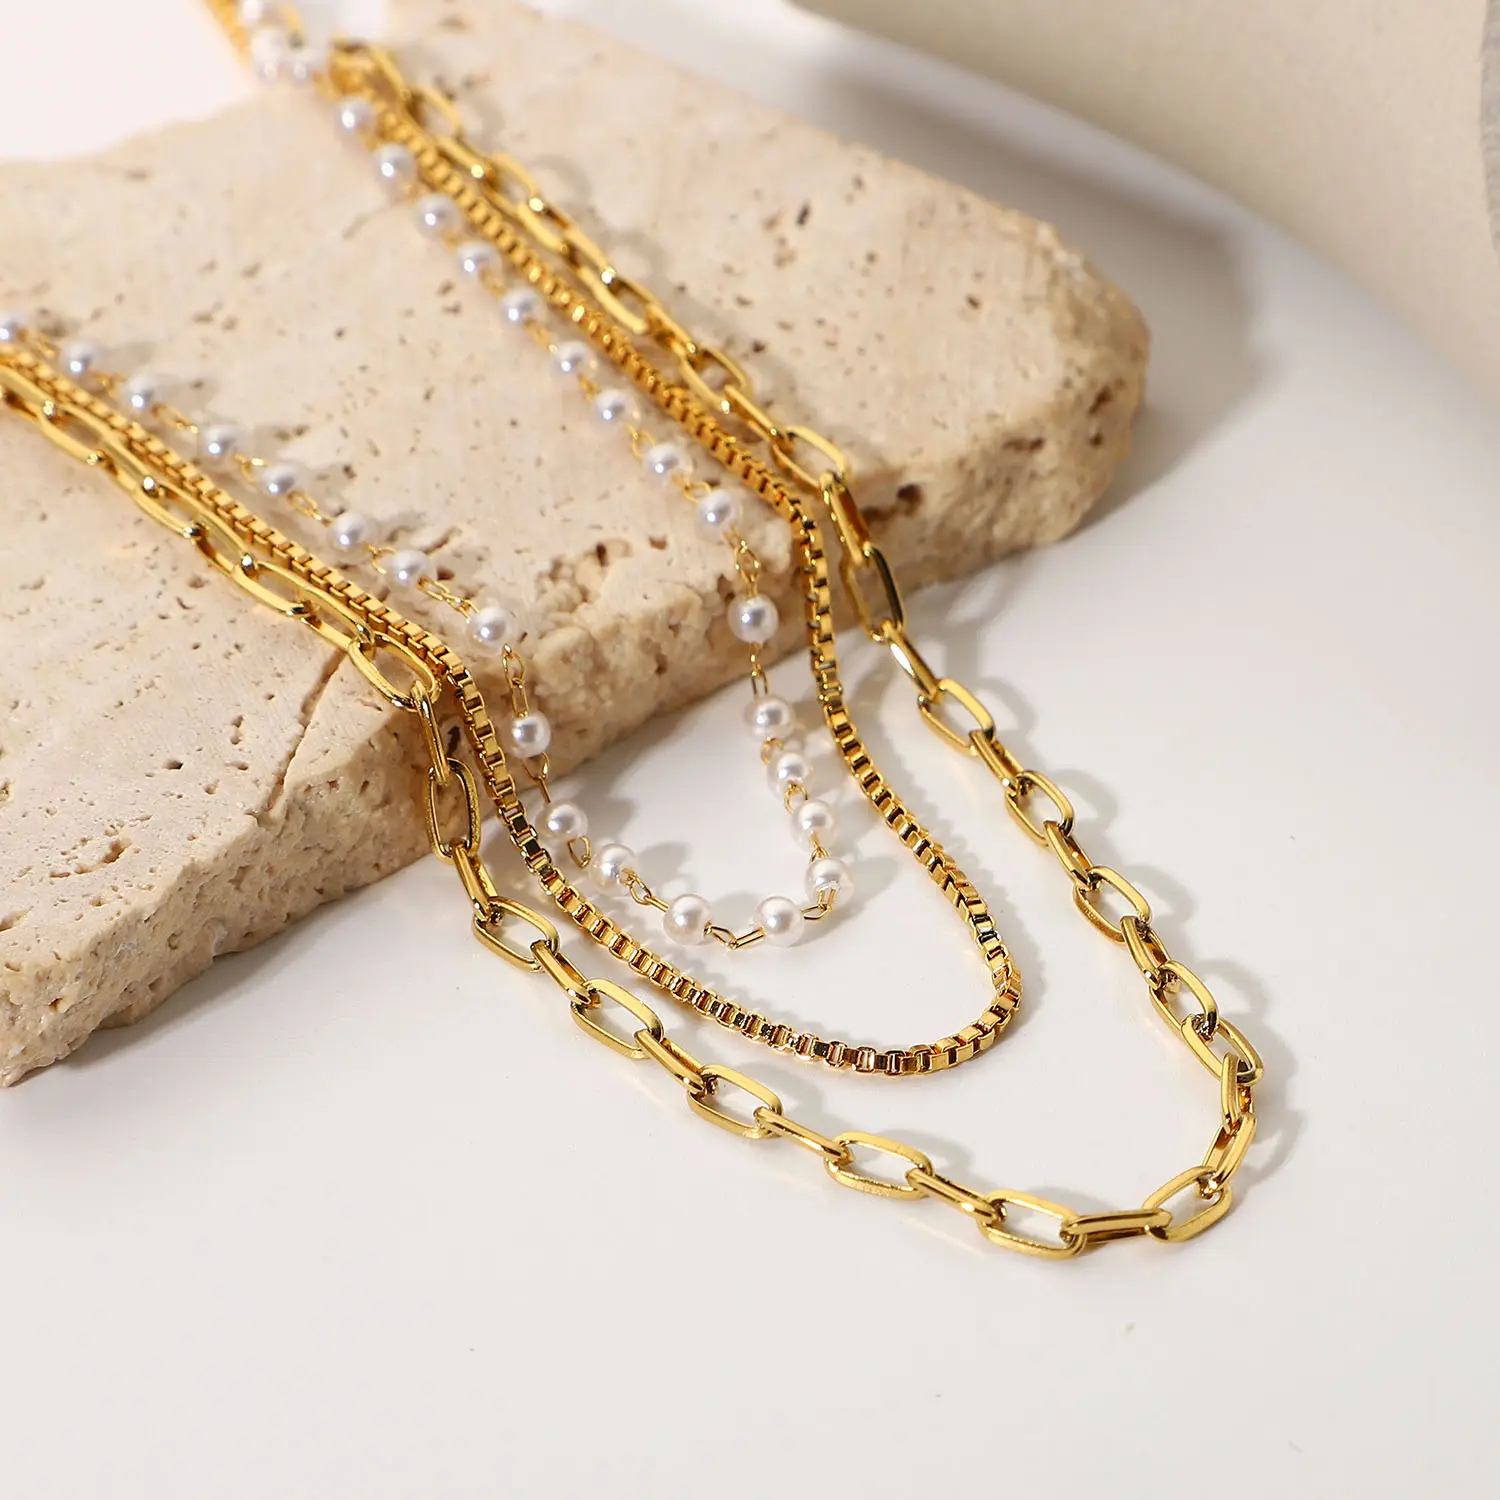 Zoetwater Parel Ketting Gold Filled Sieraden Rvs Ketting Accessoires Vrouwen Layer Ketting